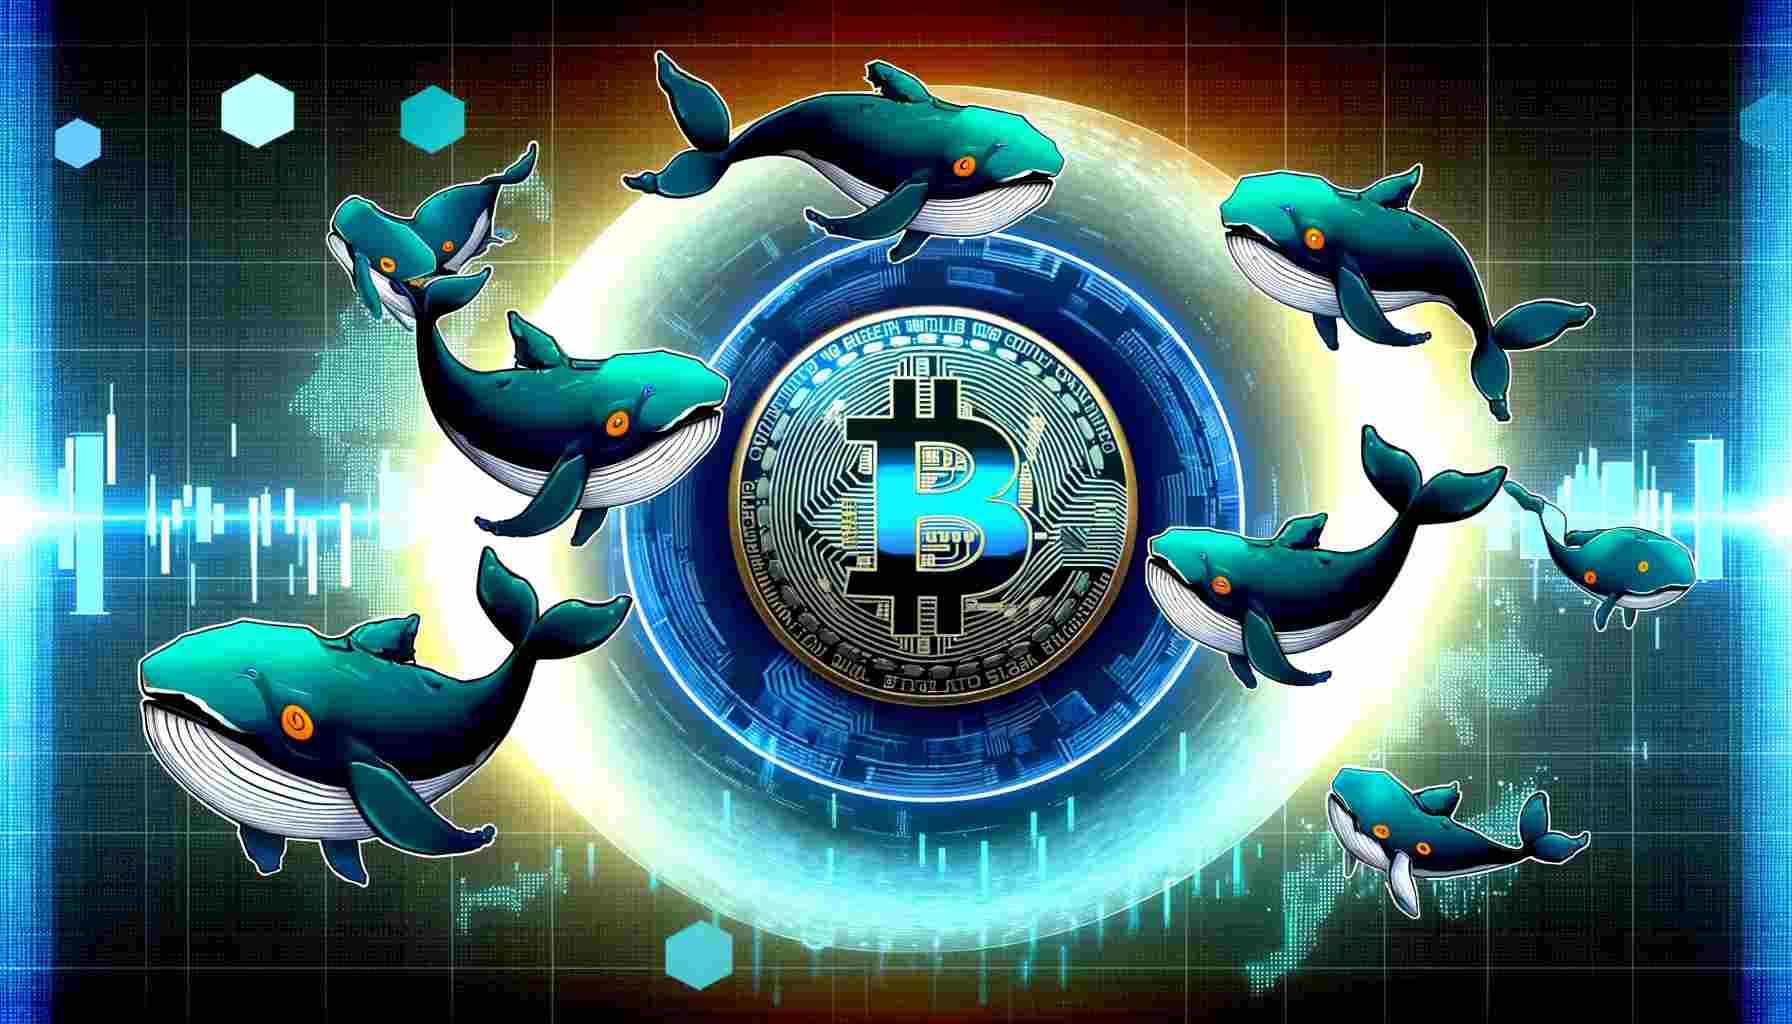 Bitcoin: ‘Quite confident’ whales with ‘most pull’ have this price prediction